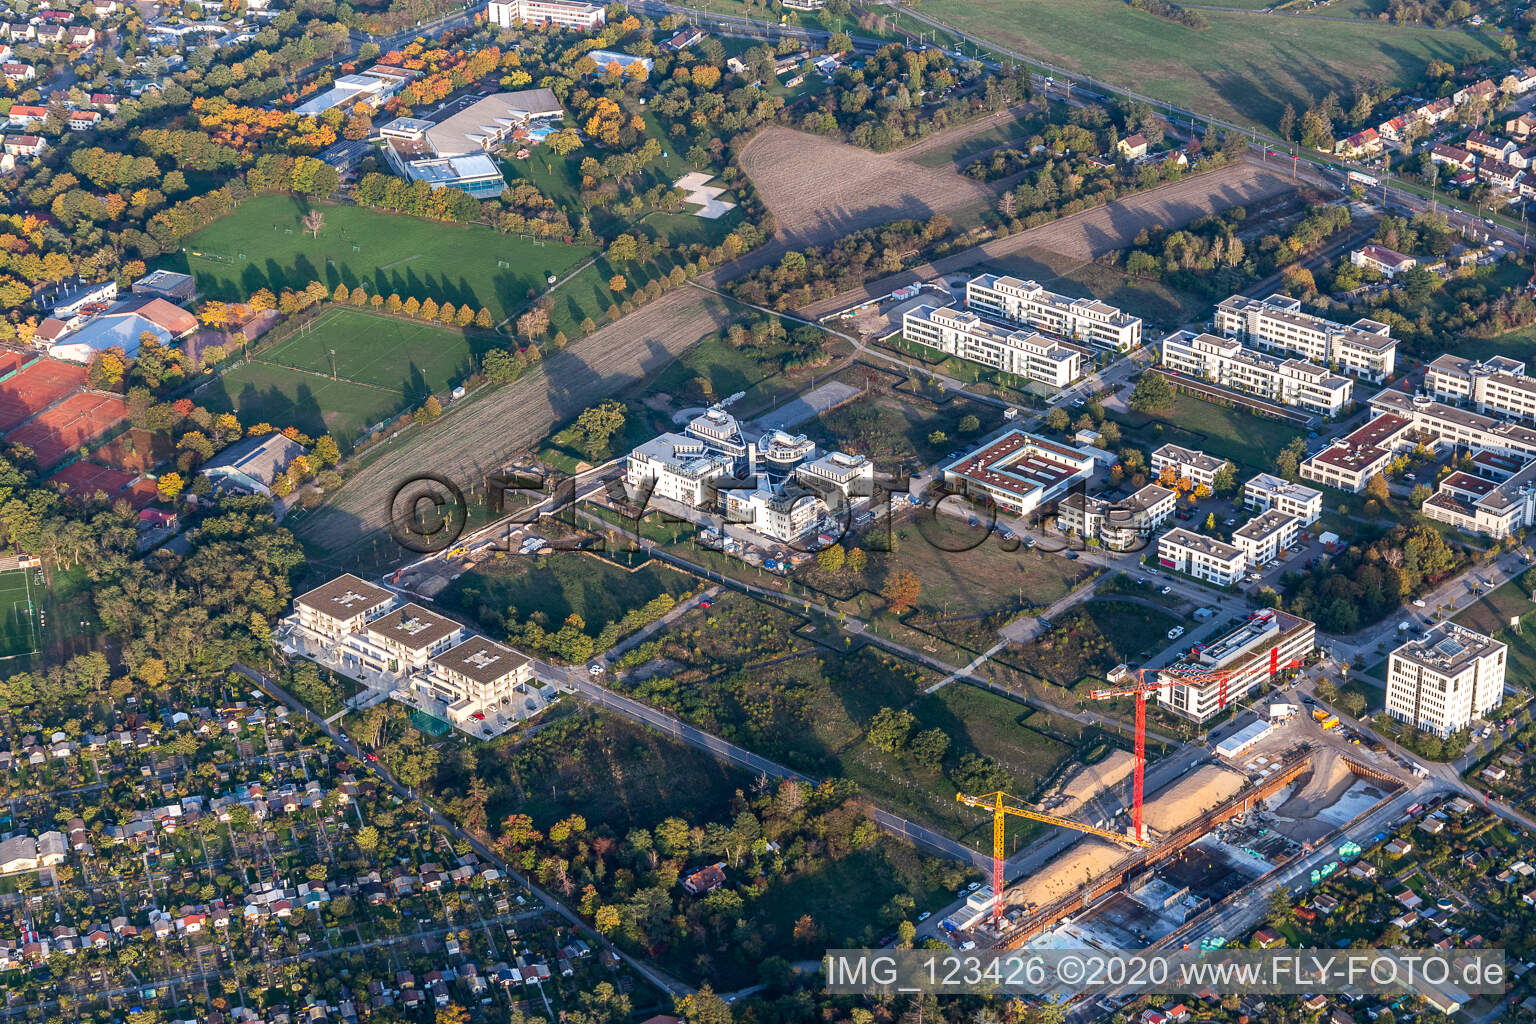 Aerial view of LTC - Linder Technology Campus with Weum GmbH, Systec&Services and Systec&Solutions on Wilhelm-Schickard-Straße in the Technology Park Karlsruhe in the district Rintheim in Karlsruhe in the state Baden-Wuerttemberg, Germany